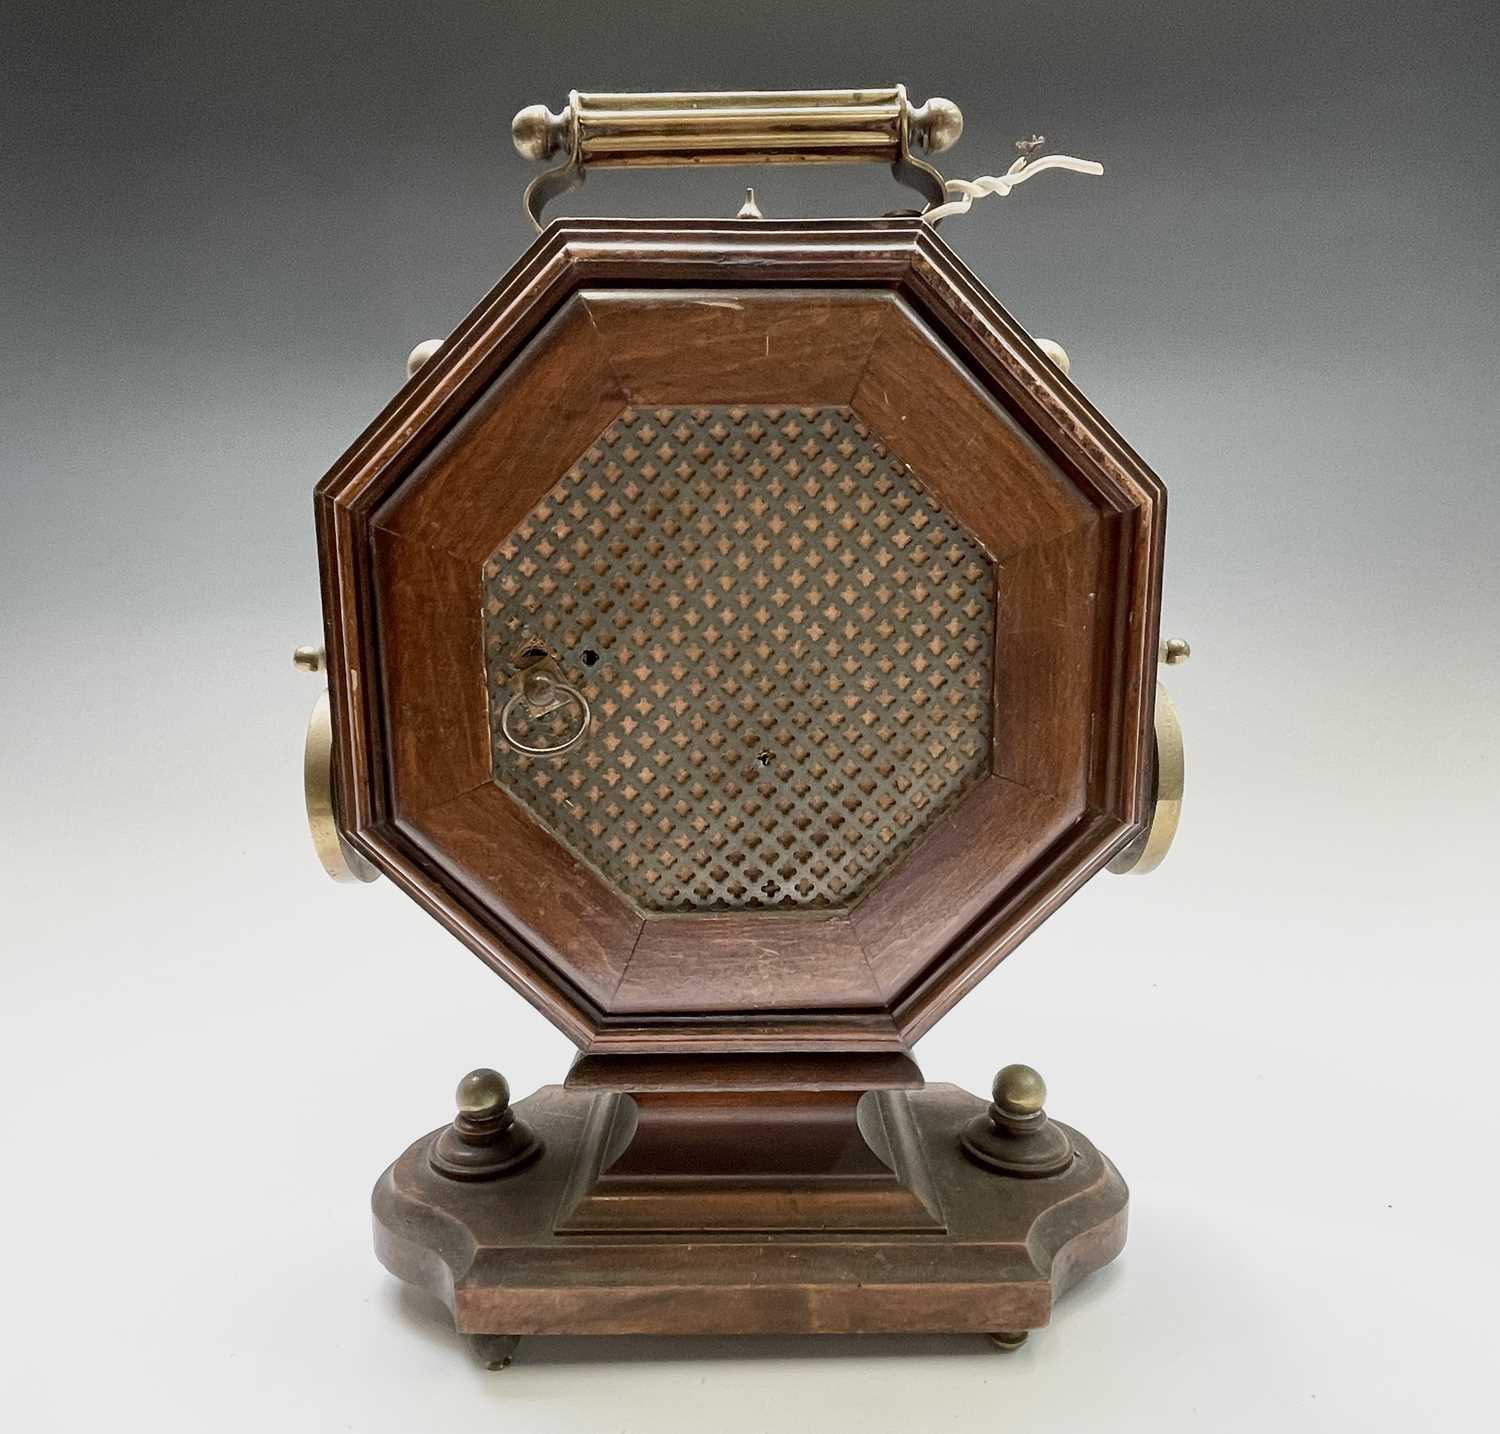 A German walnut and brass mantel clock, circa 1900, in the Aesthetic taste, with octagonal case - Image 3 of 11